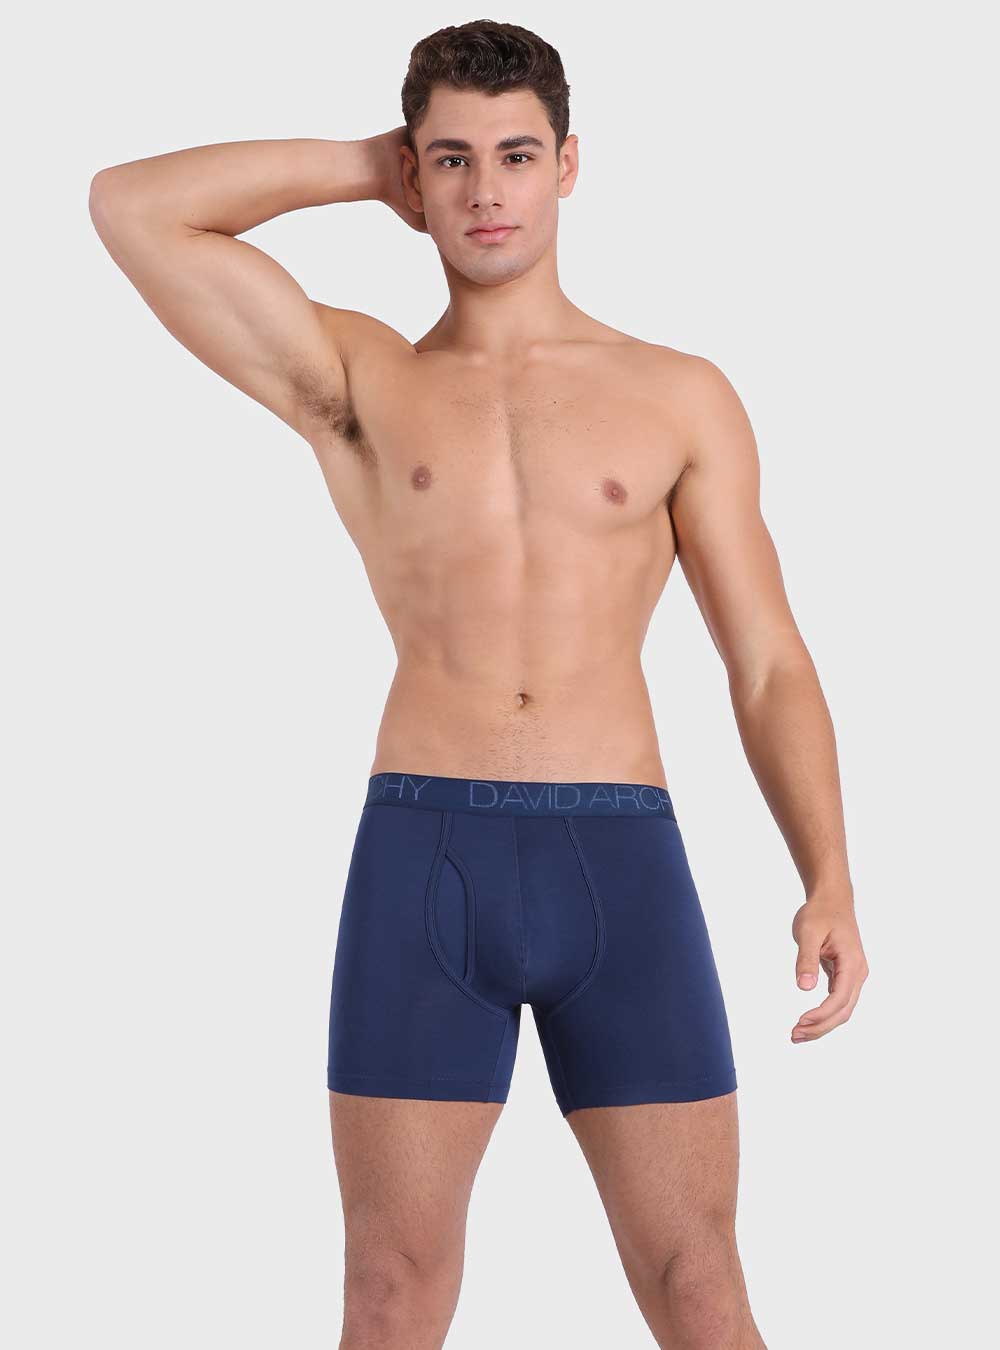 David Archy 4 Packs Trunks Bamboo Rayon Breathable Soft Underwear Shorts  for Men